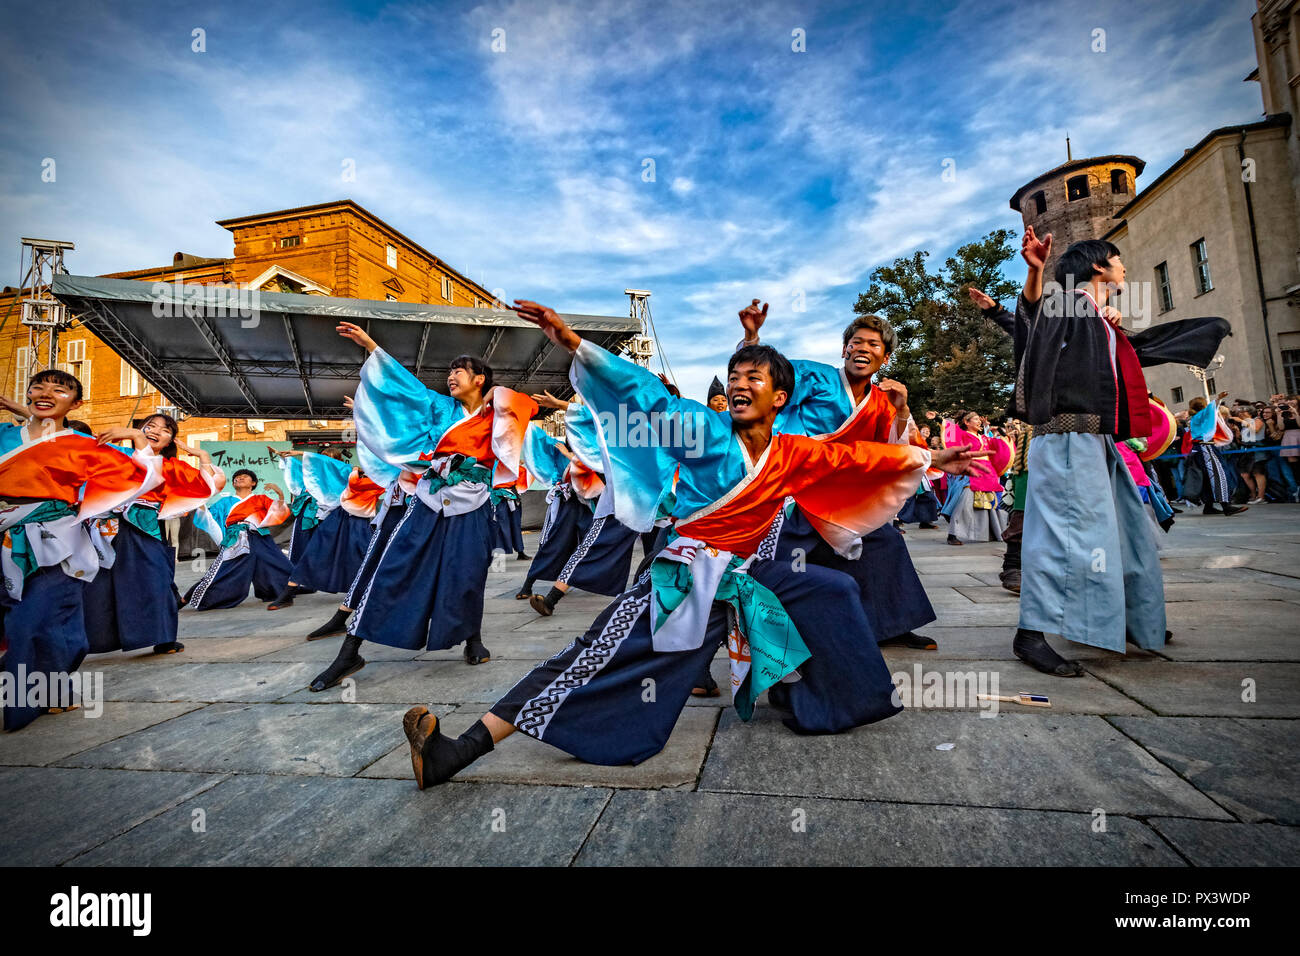 Italy Piedmont Turin Japan week - Inauguration in Piazza Castello with artistic performances of dances, drums, calligraphy and Samurai. Credit: Realy Easy Star/Alamy Live News Stock Photo